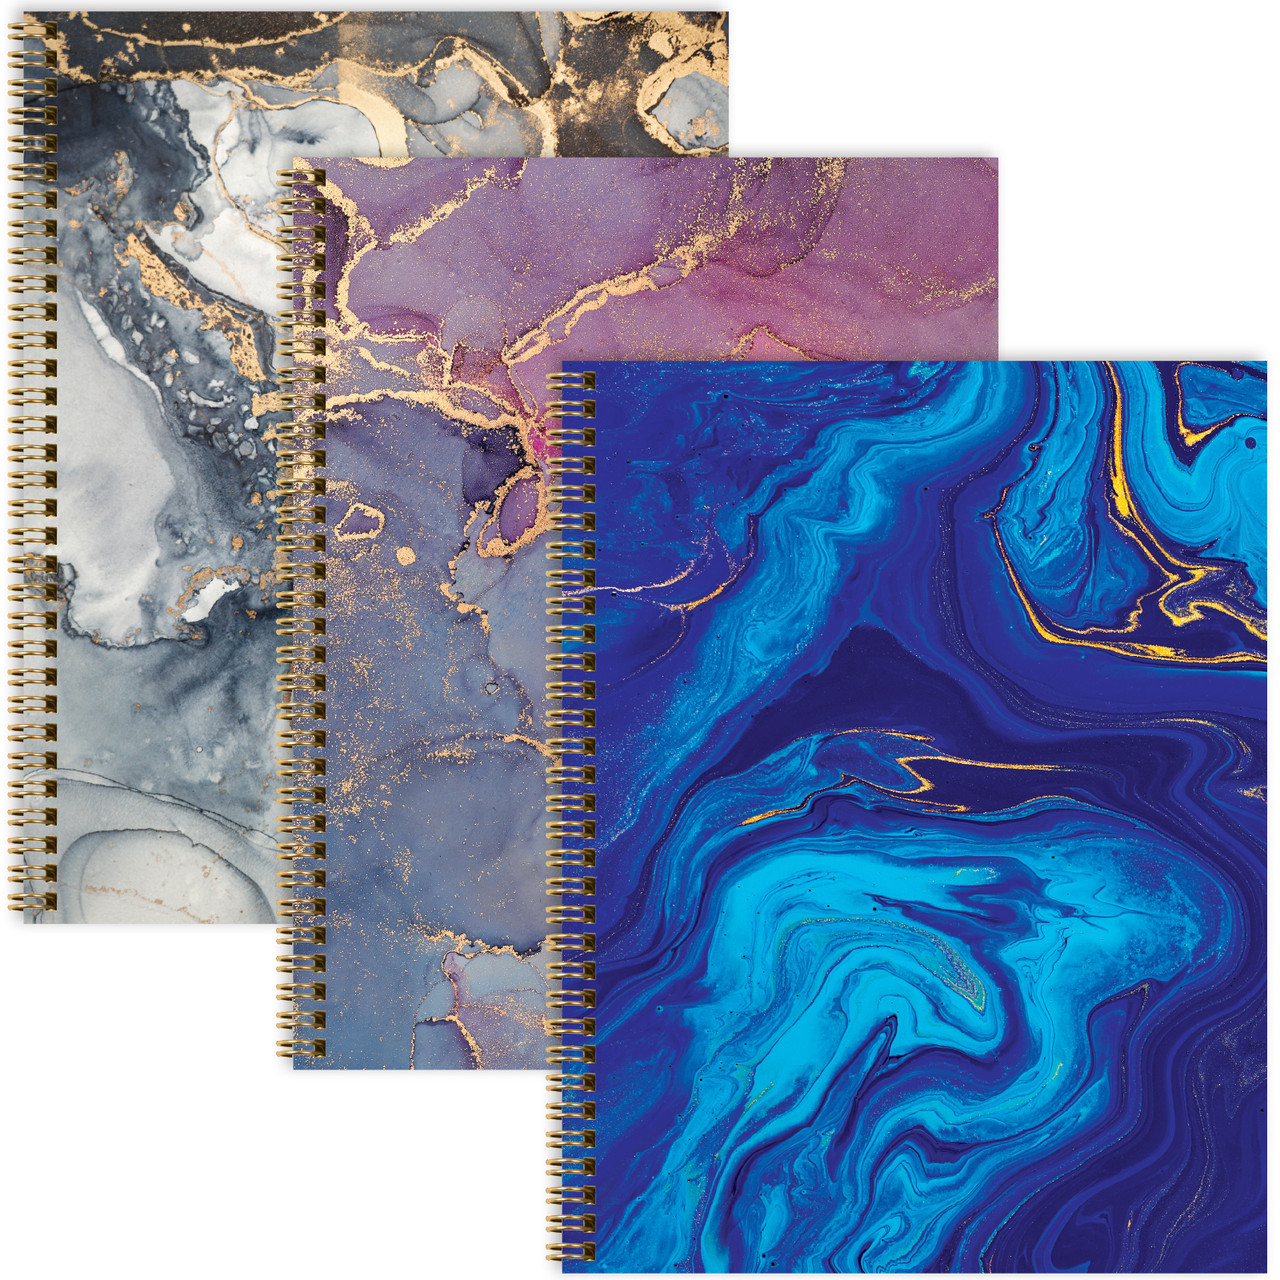 8.5x11 Fashion Spiral Notebook, 3-Pack, 120 Pages, College Ruled